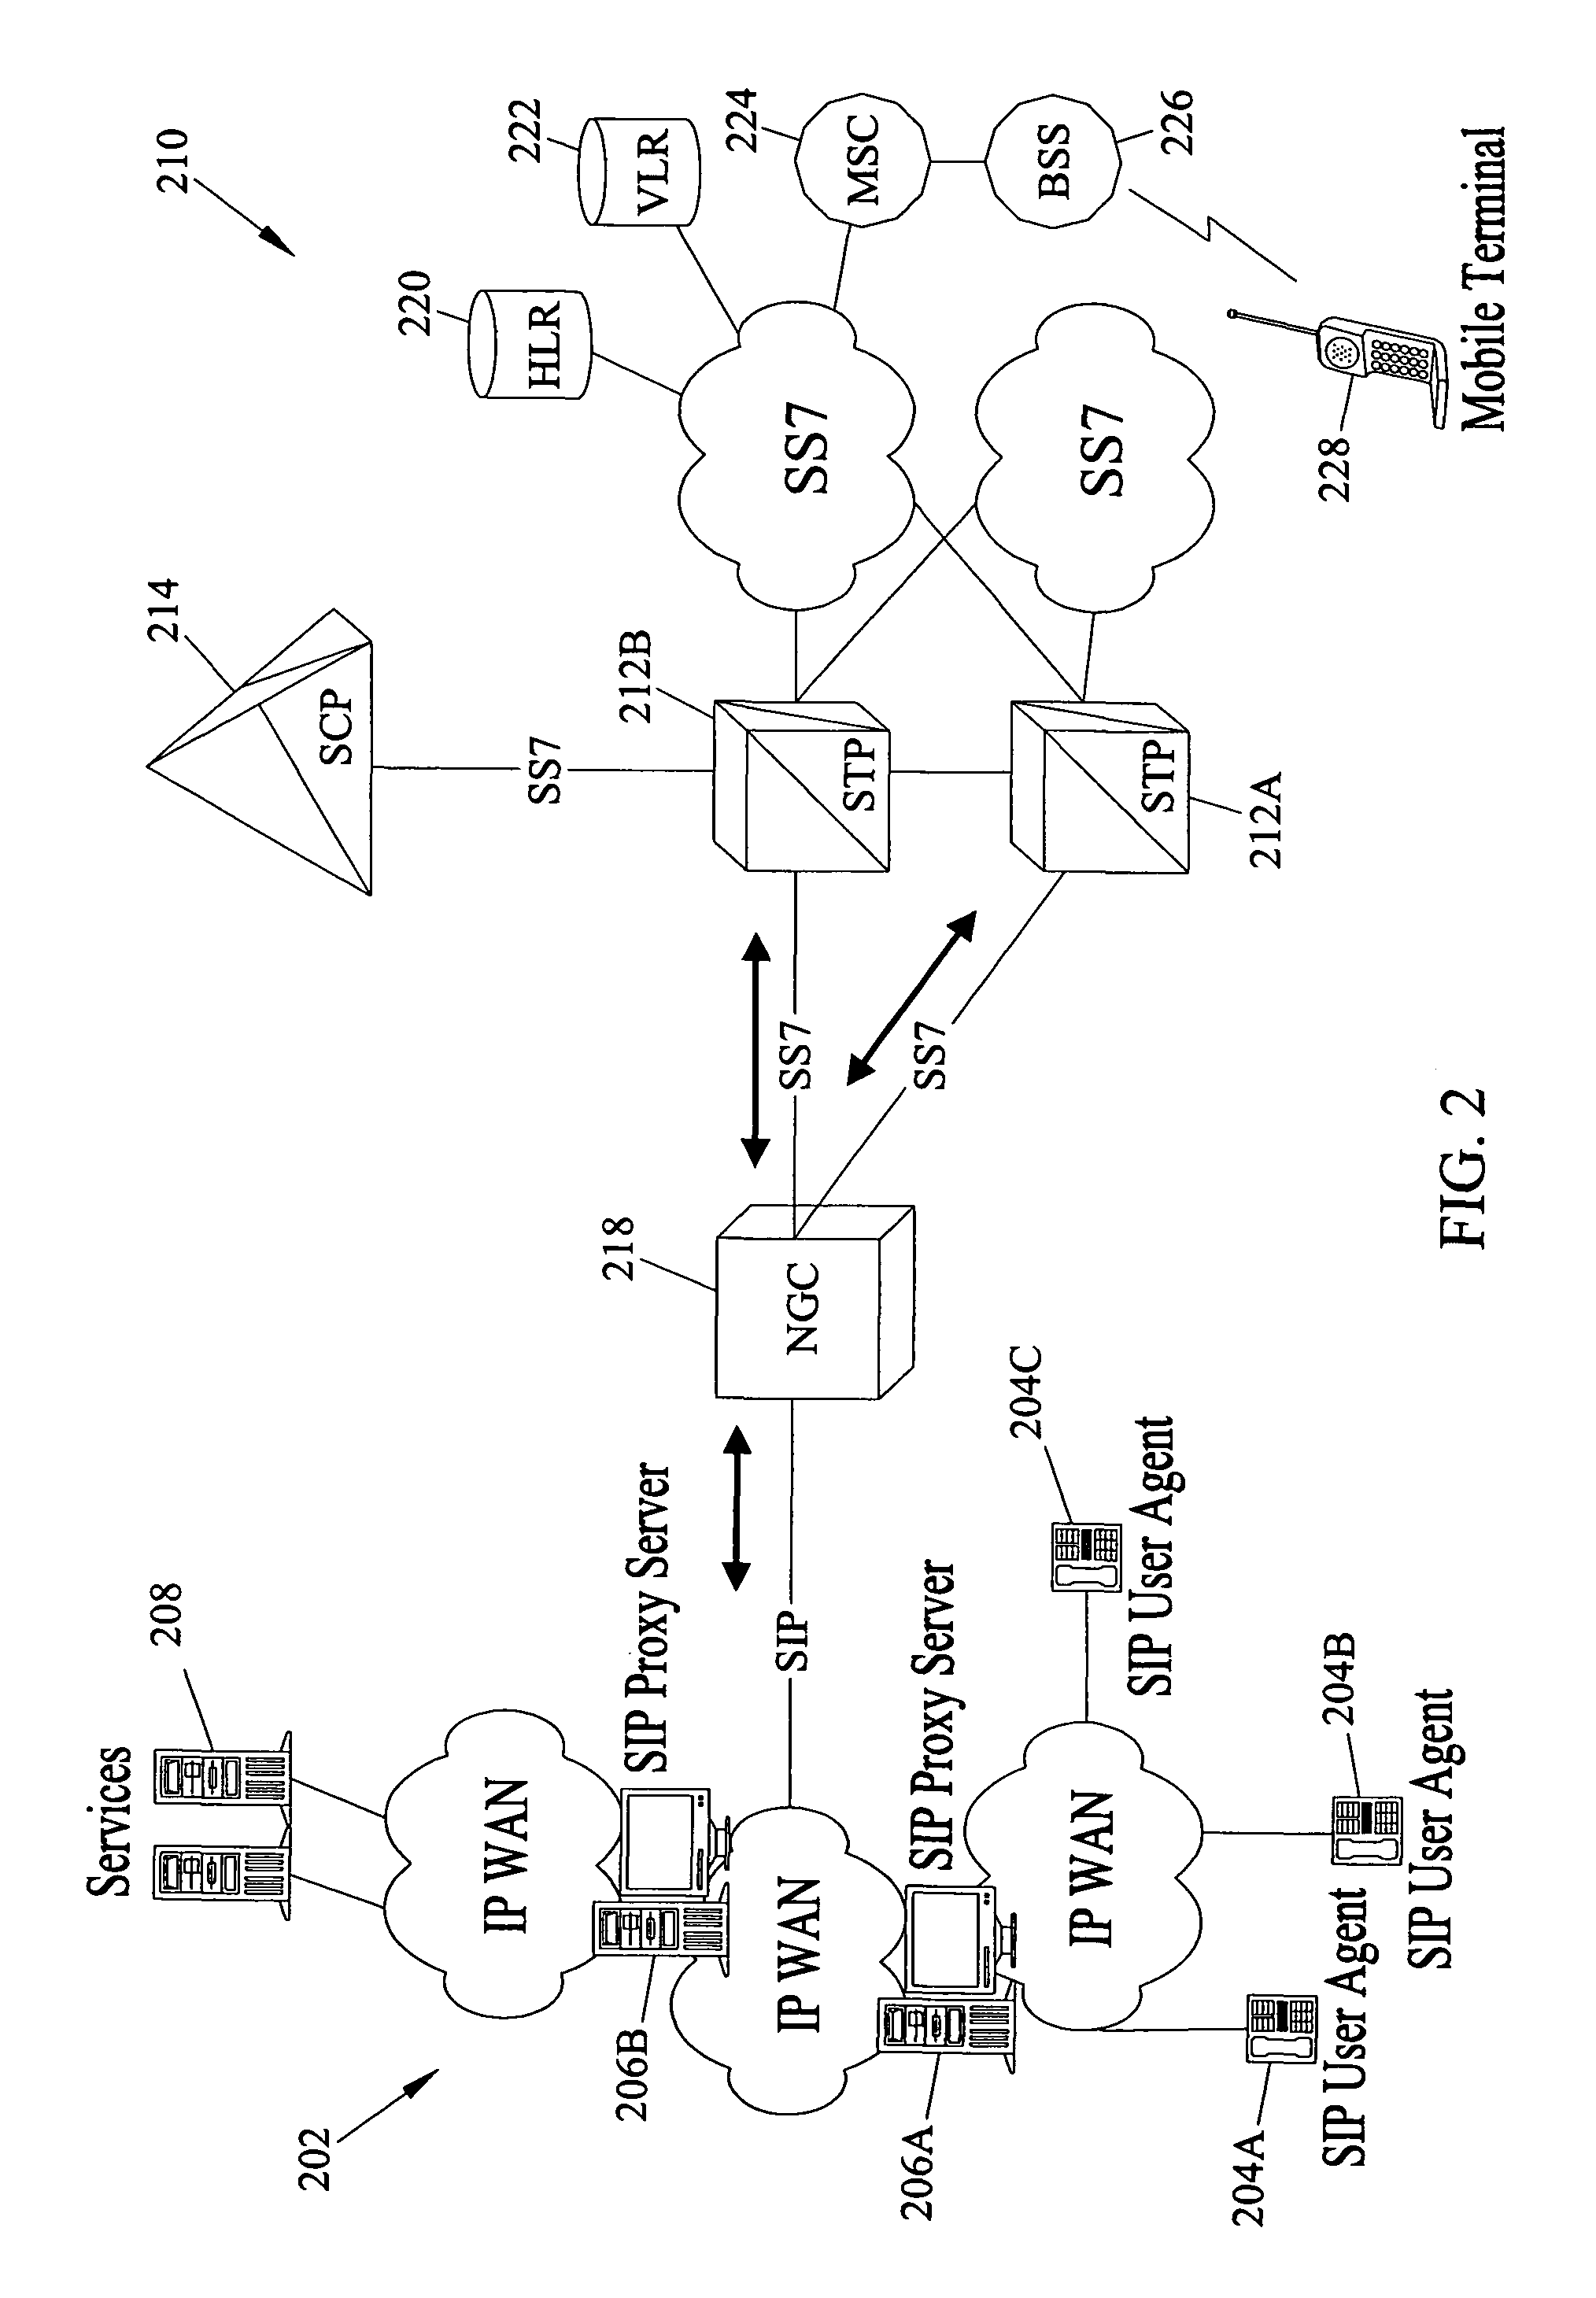 Methods and systems for converting an internet protocol (IP)-based message containing subscriber content to a public switched telephone network (PSTN)-based message including subscriber content